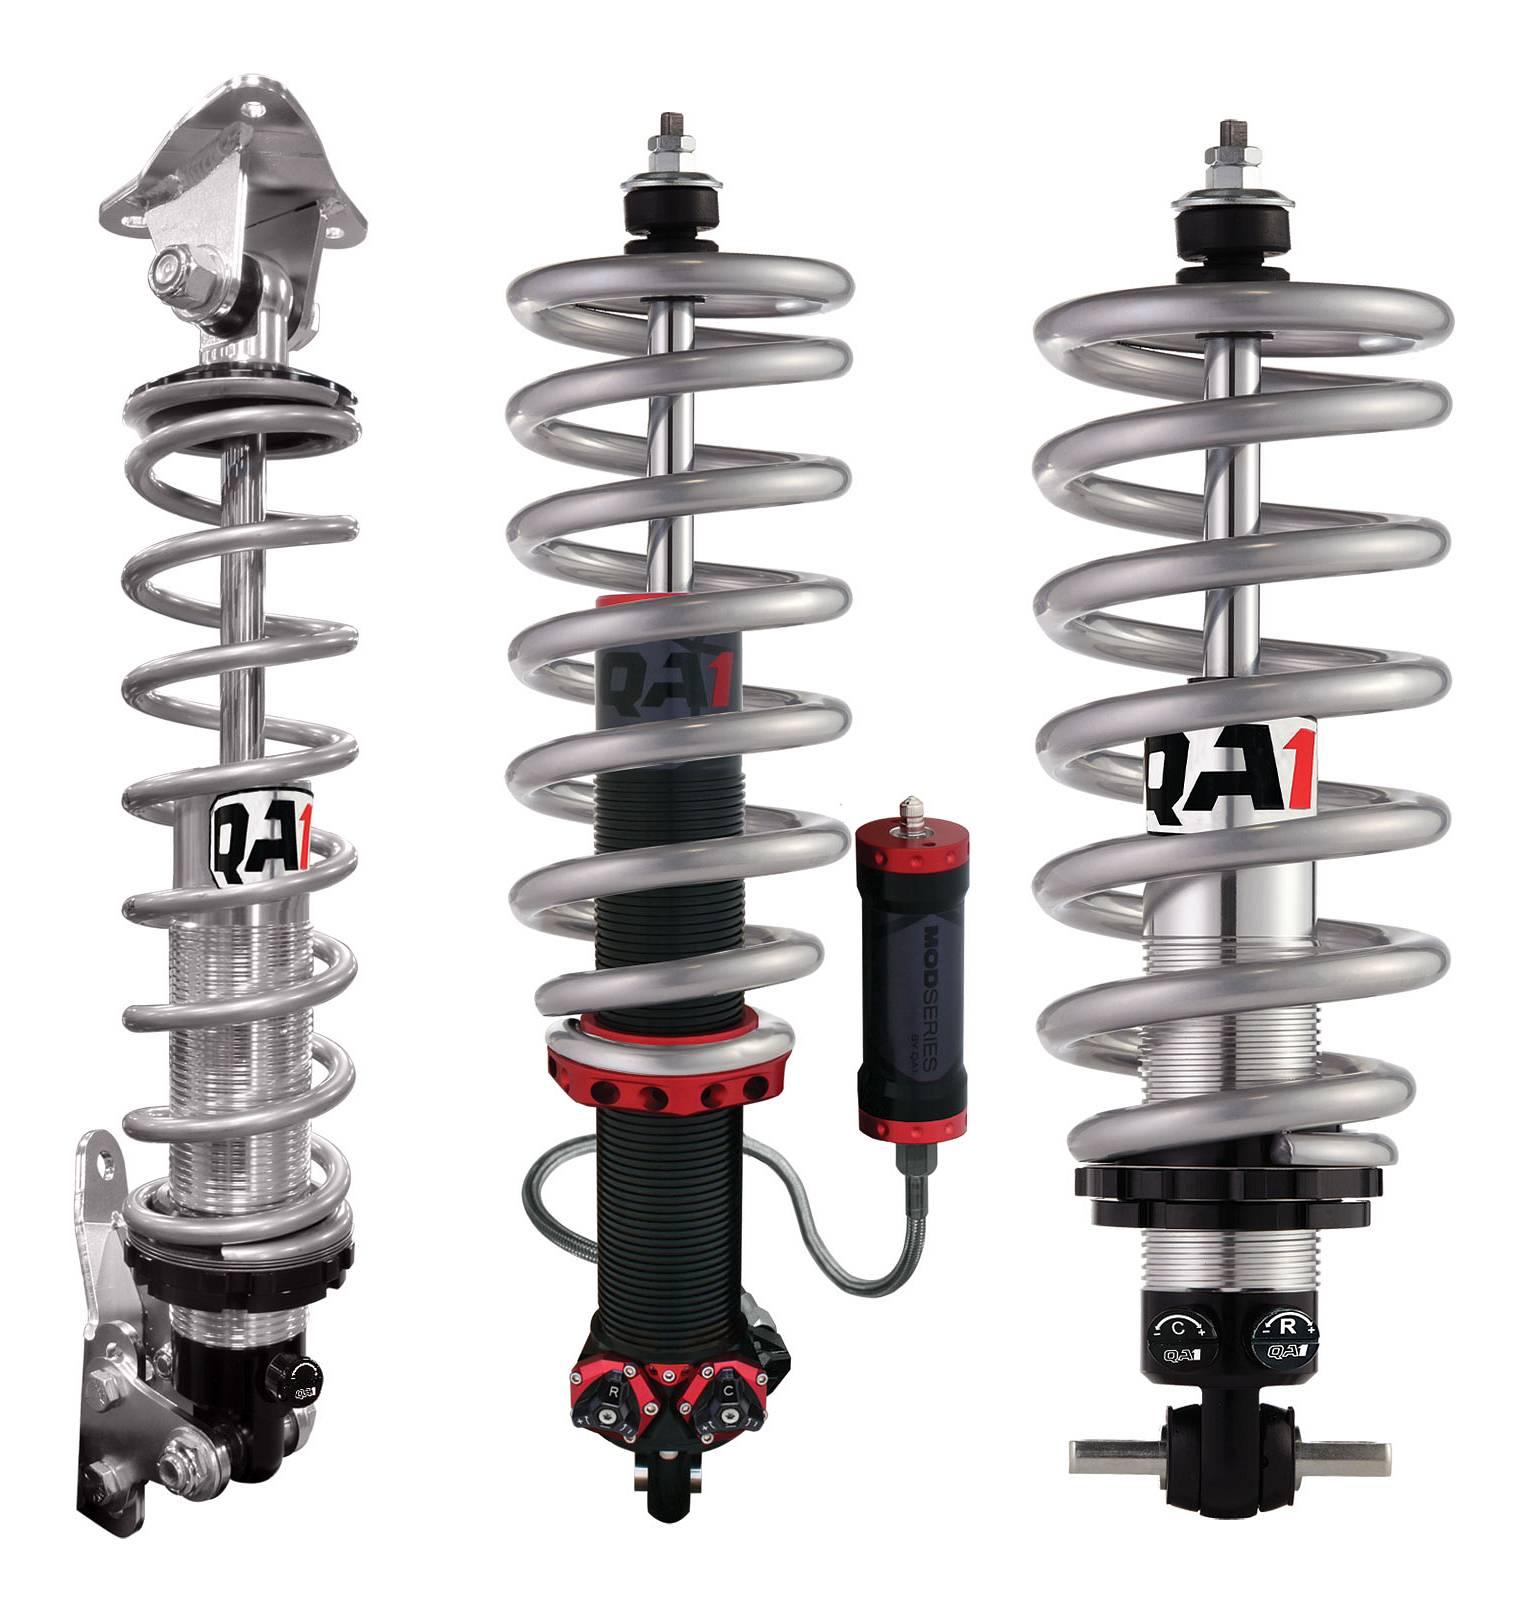 How You Can Upgrade Your G-Body Suspension In Stages With QA1